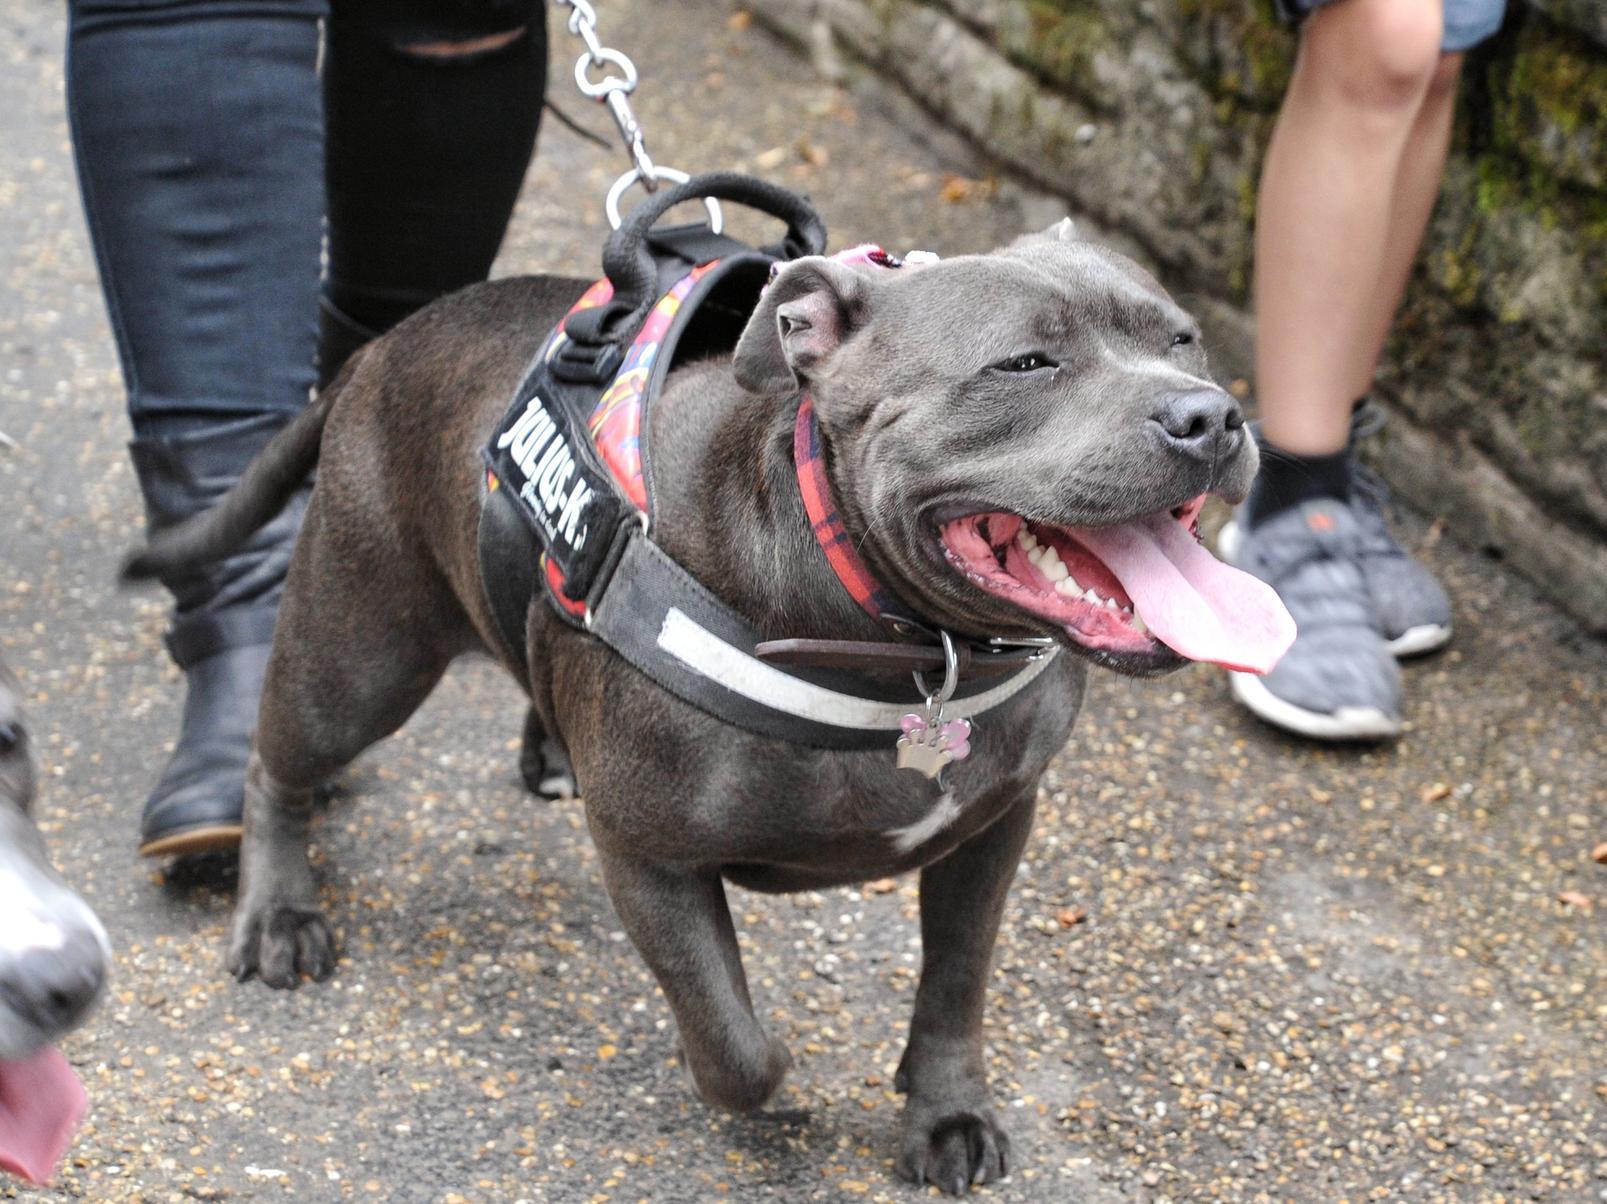 Staffordshire Bull Terriers were stolen in 2019, according to figures.